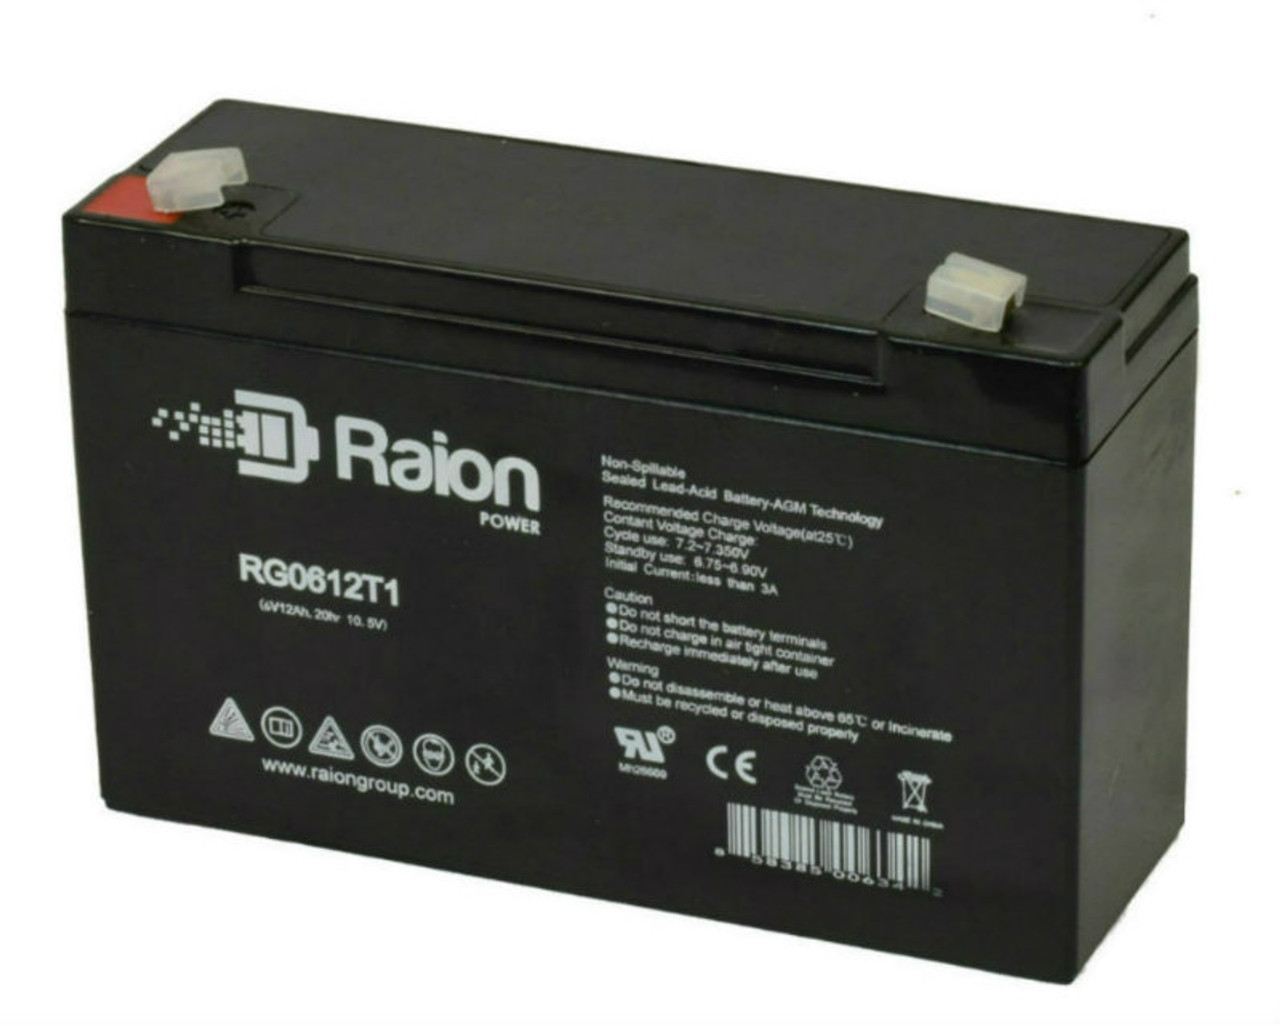 Raion Power RG06120T1 Replacement Battery for Chiway SJ6V12Ah